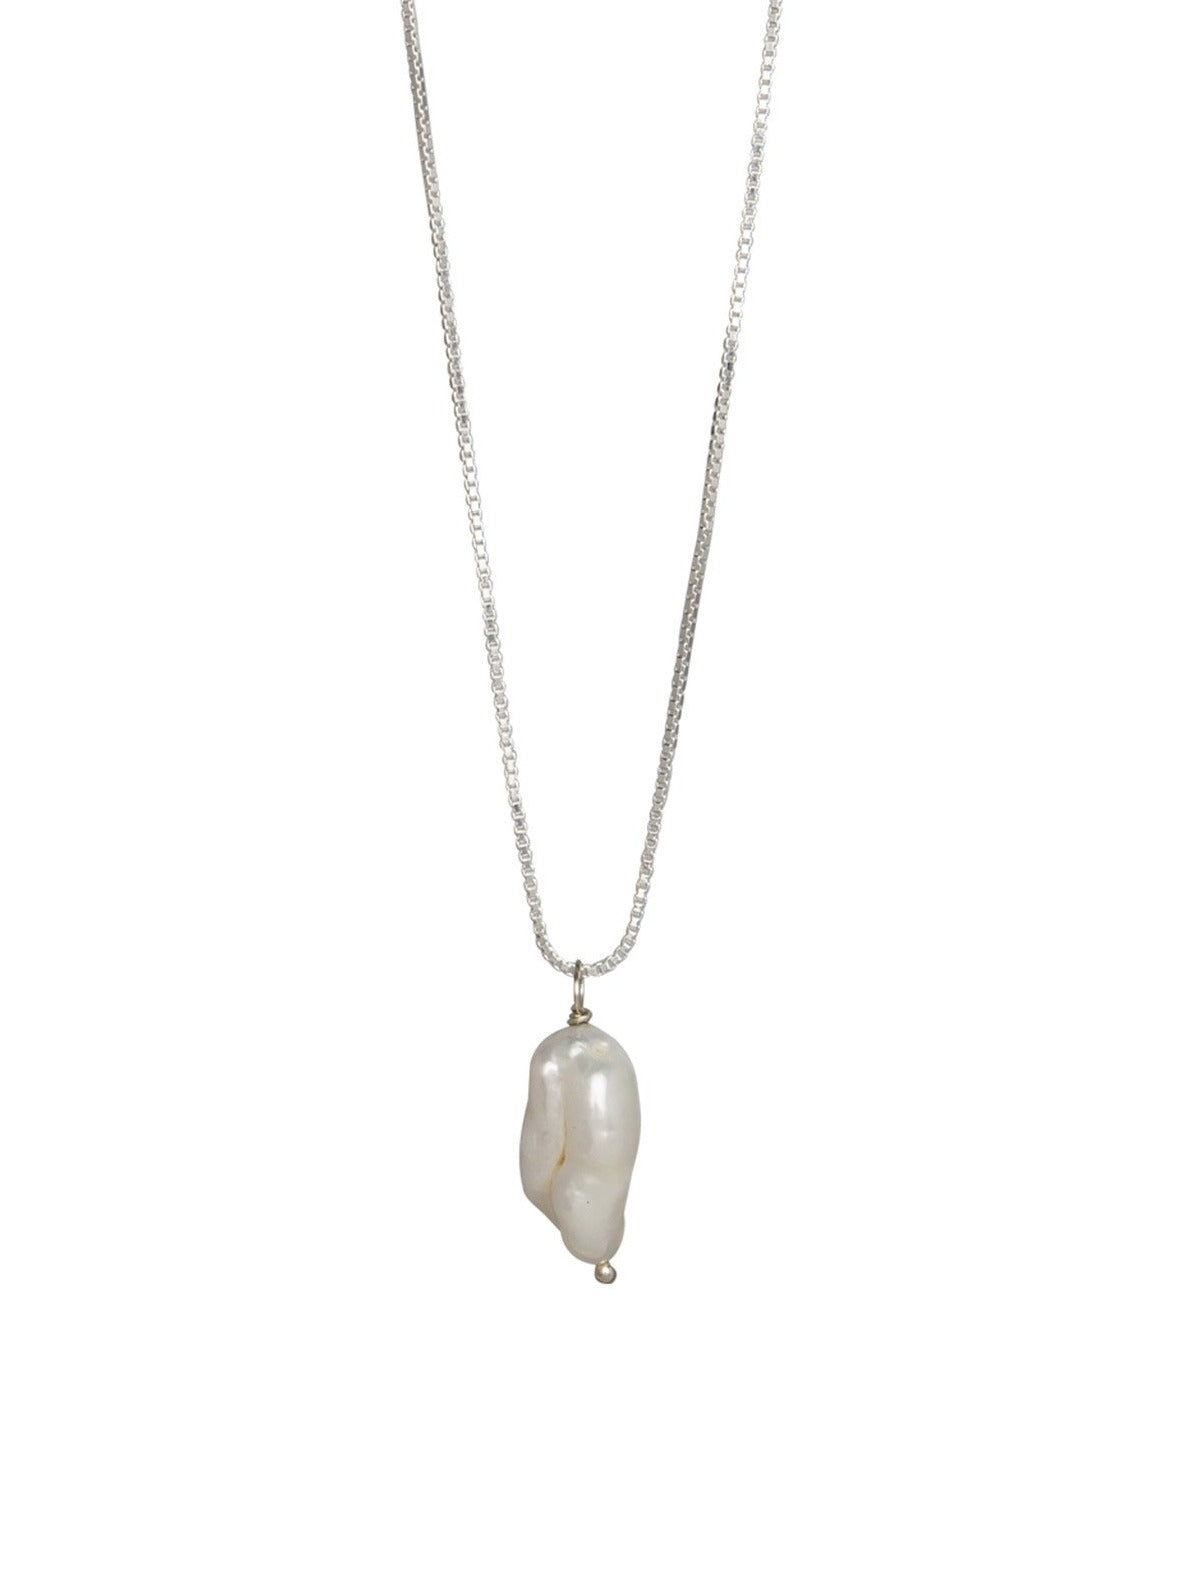 Baroque Freshwater Pearl Drop Necklace Sterling Silver